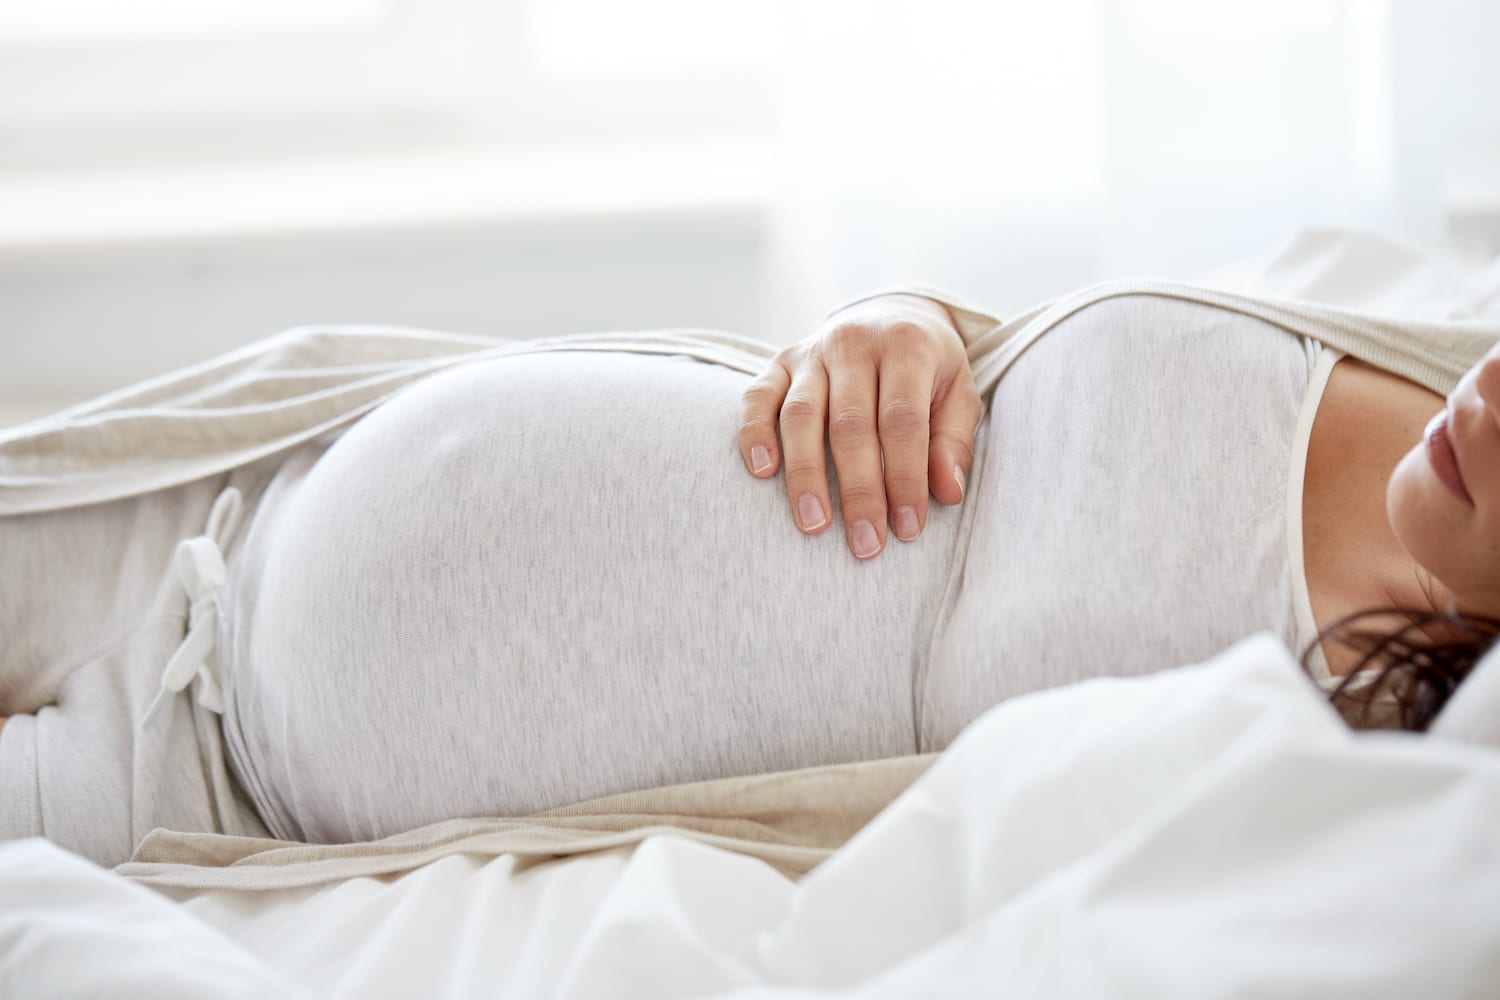 Sleeping While Pregnant: First Trimester